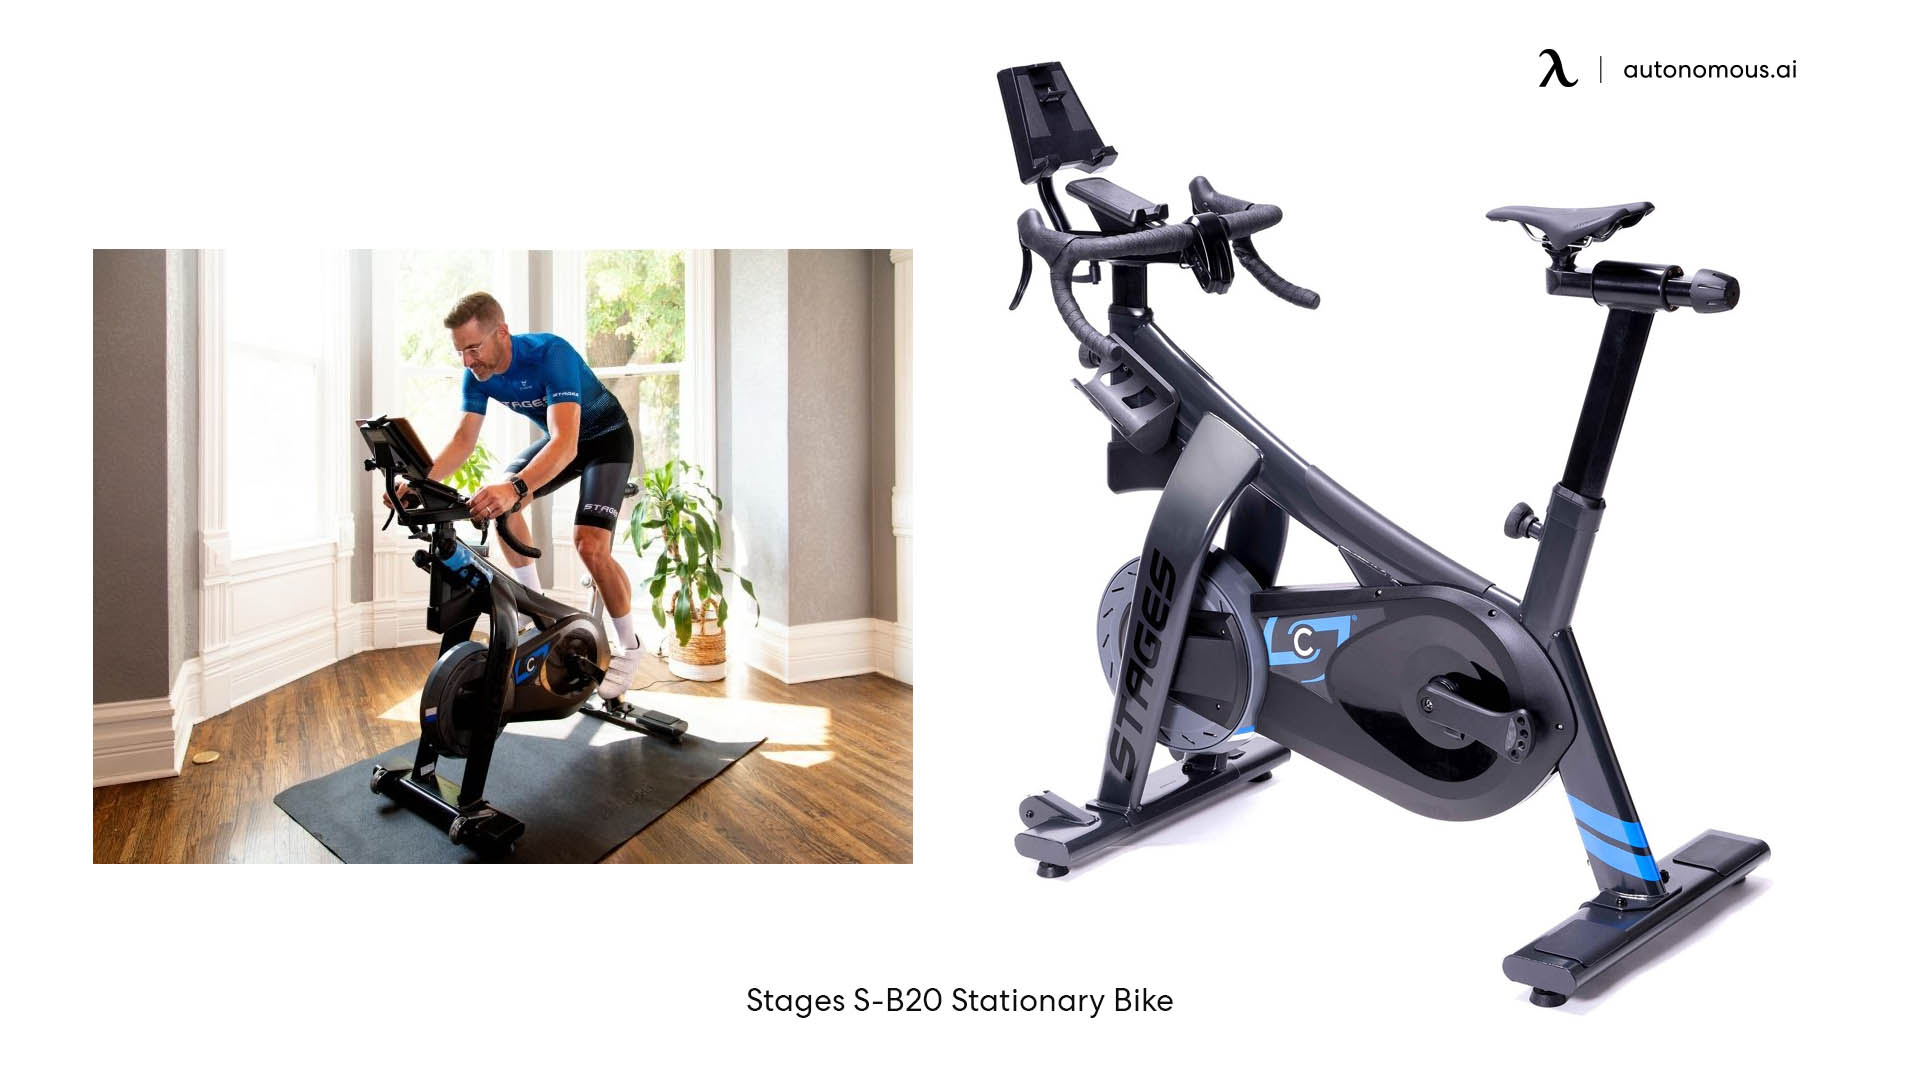 Stages S-B20 Stationary Bike